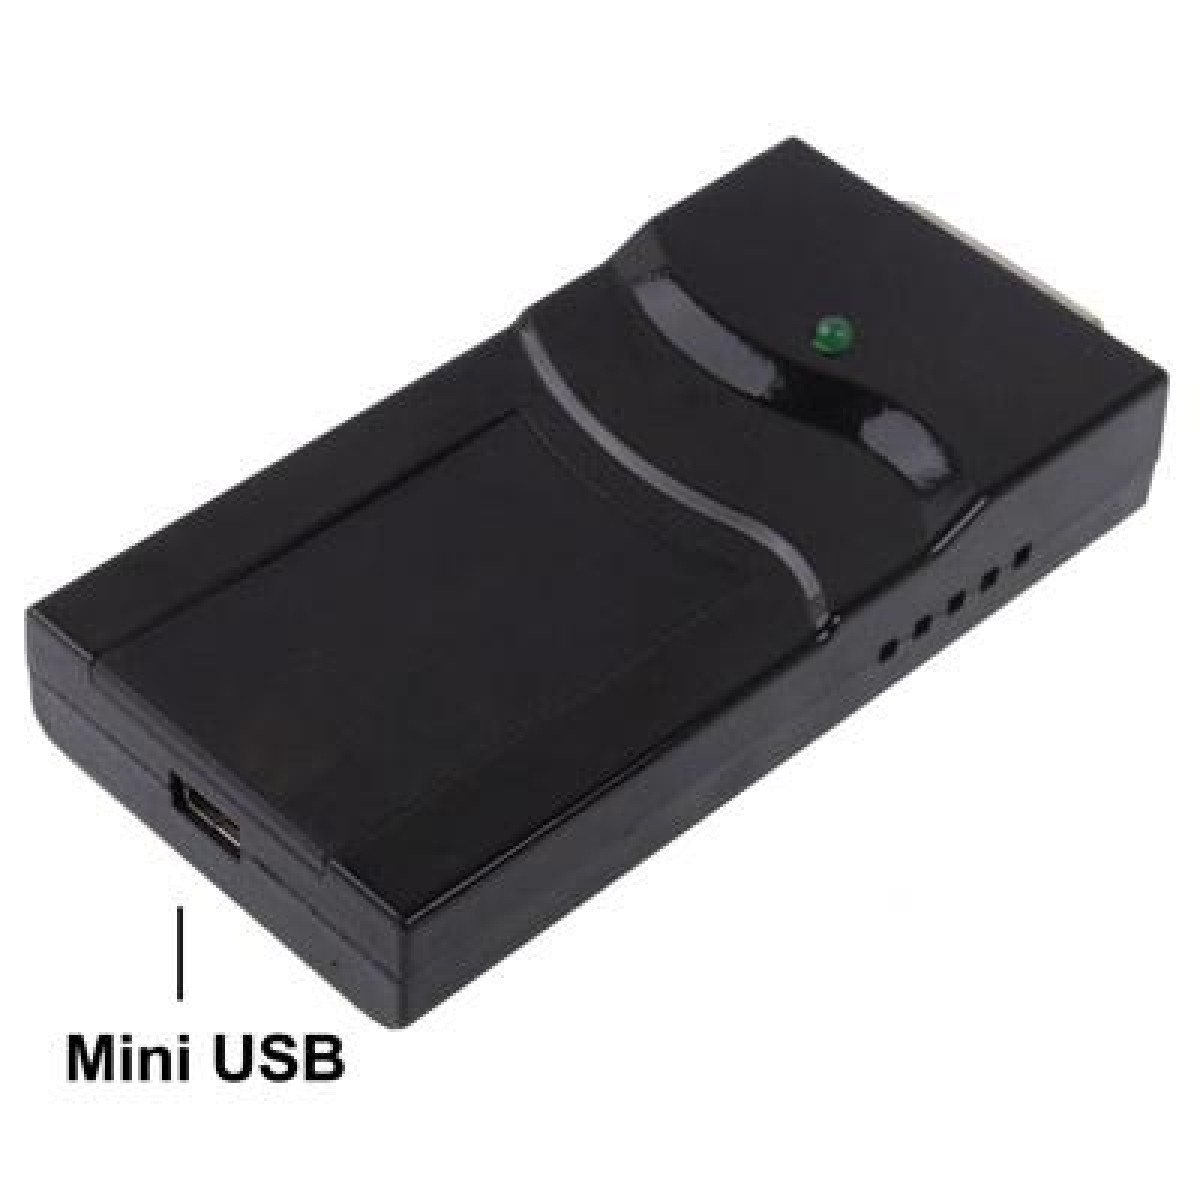 USB 2.0 to DVI / VGA / HDMI Display Adapter, Support Full HD 1080P, Expandable up to 6 Display Units